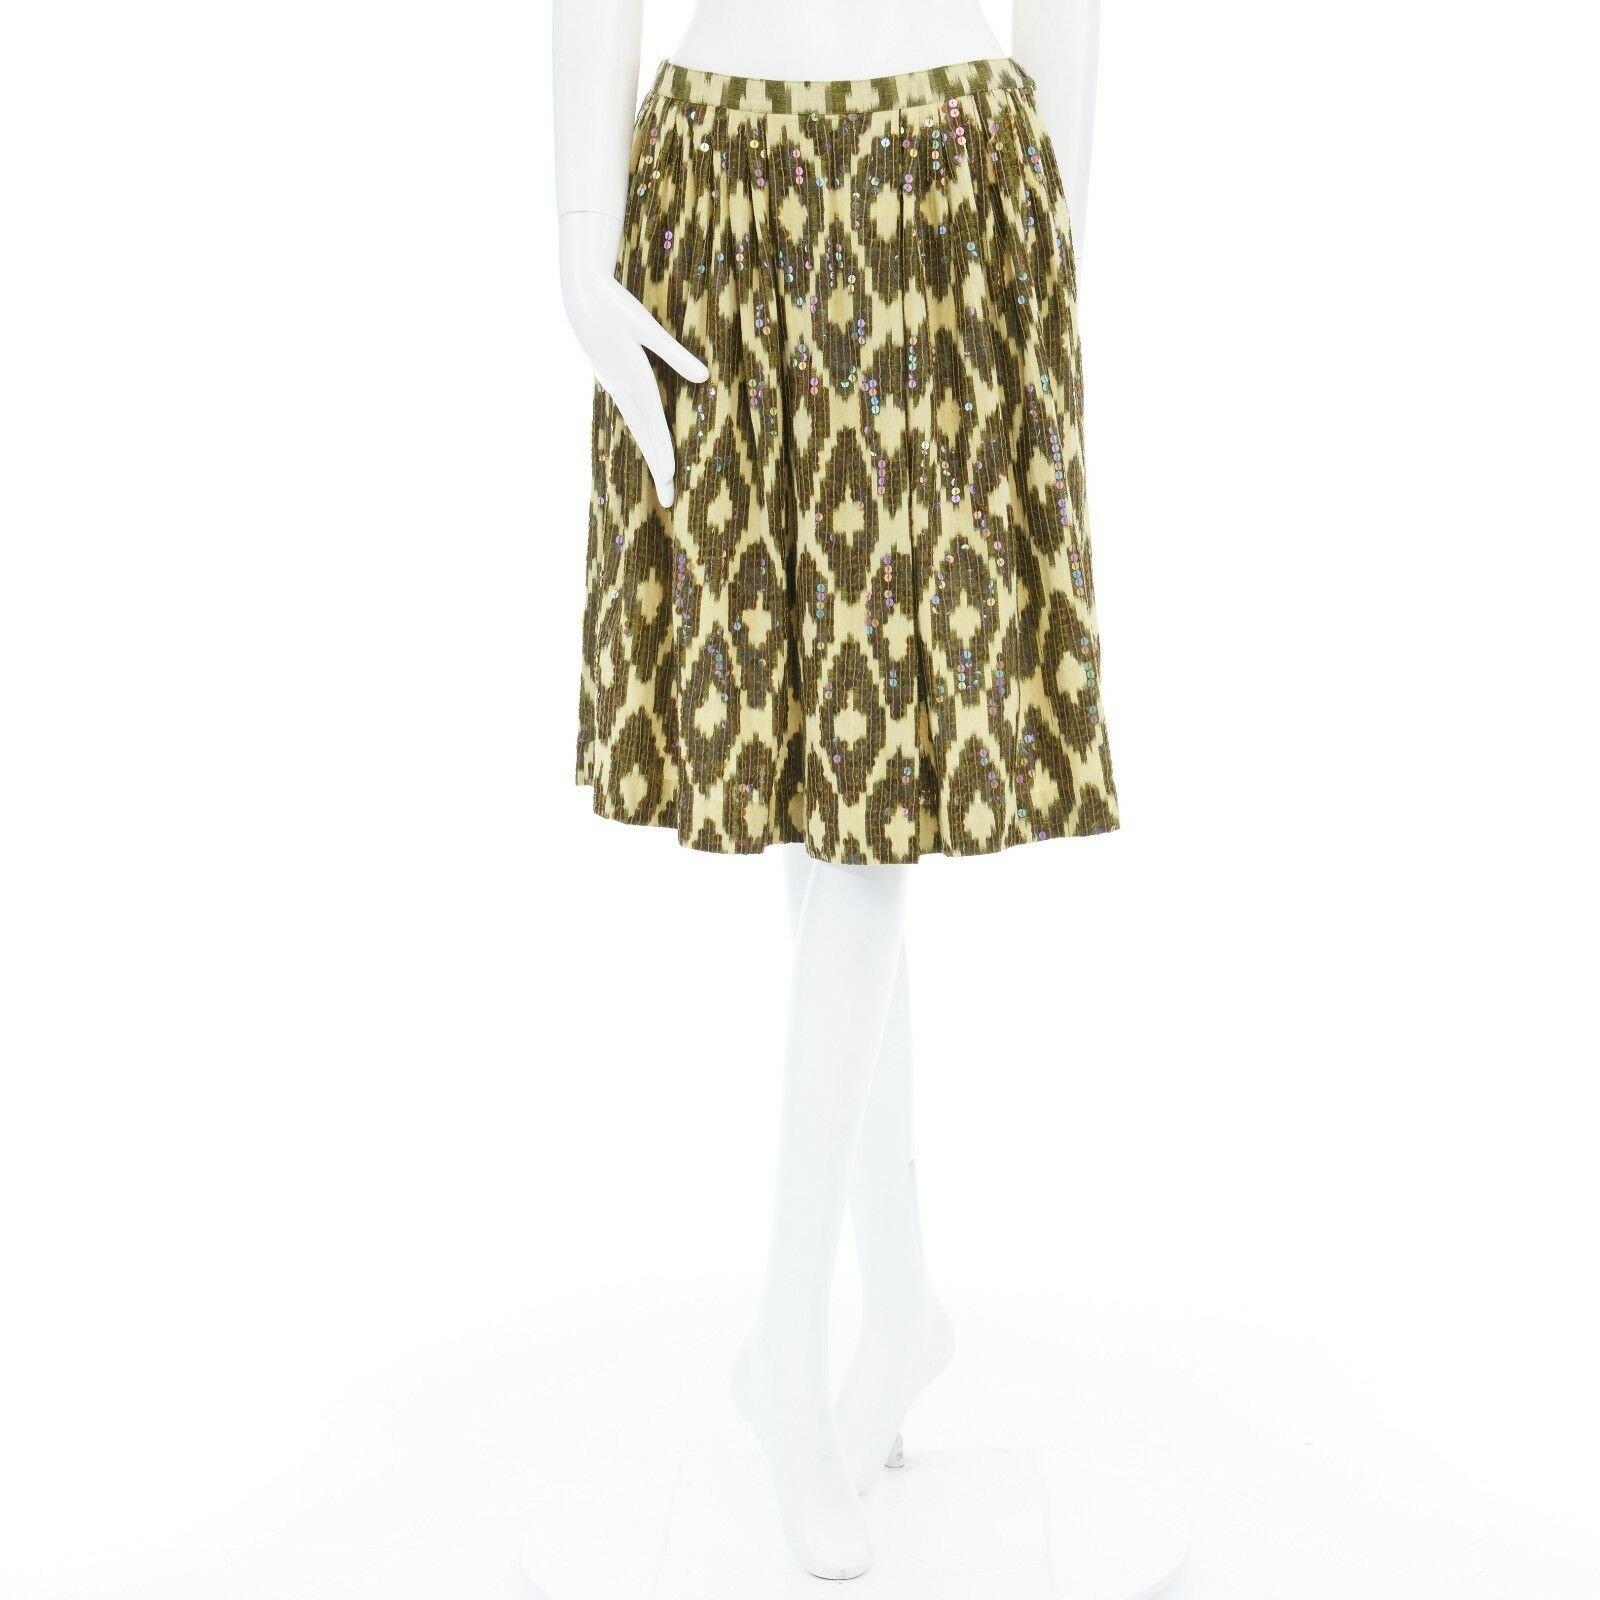 ASHISH yellow abstract leopard sport iridescent sequin embellished skirt S
Reference: CAWG/A00104
Brand: Ashish
Color: Yellow
Pattern: Leopard
Closure: Zip 
Extra Detail: Feels like linen. Canary yellow base with khaki green leopard spots. Clear